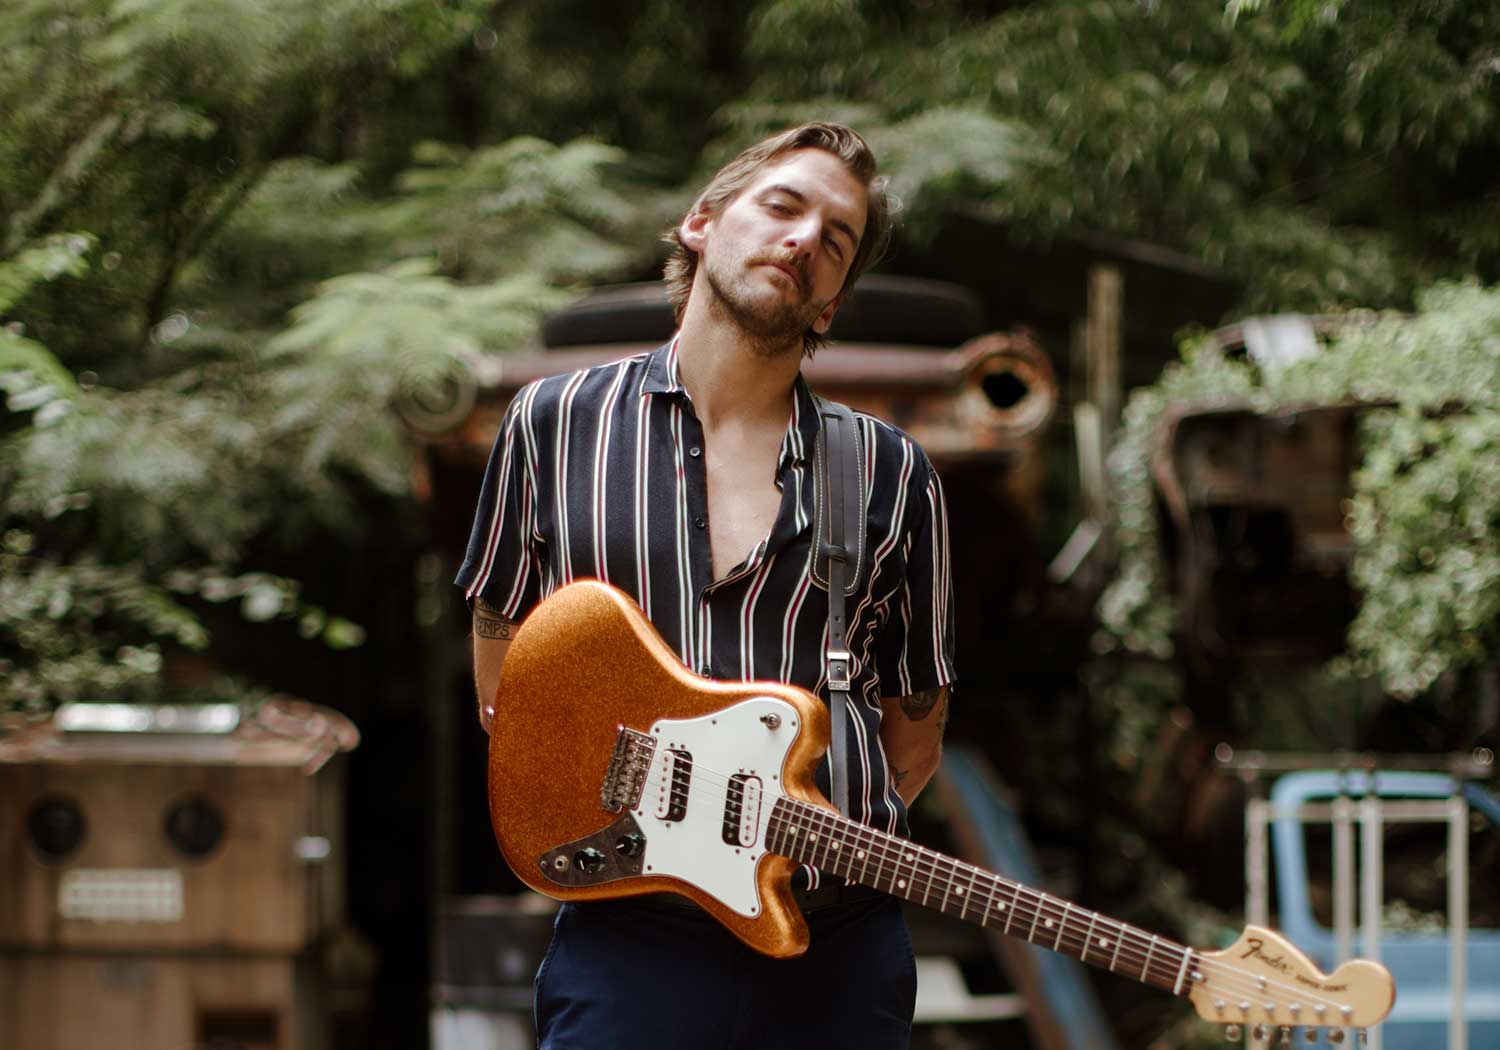 Spencer Thomas holding an electric guitar